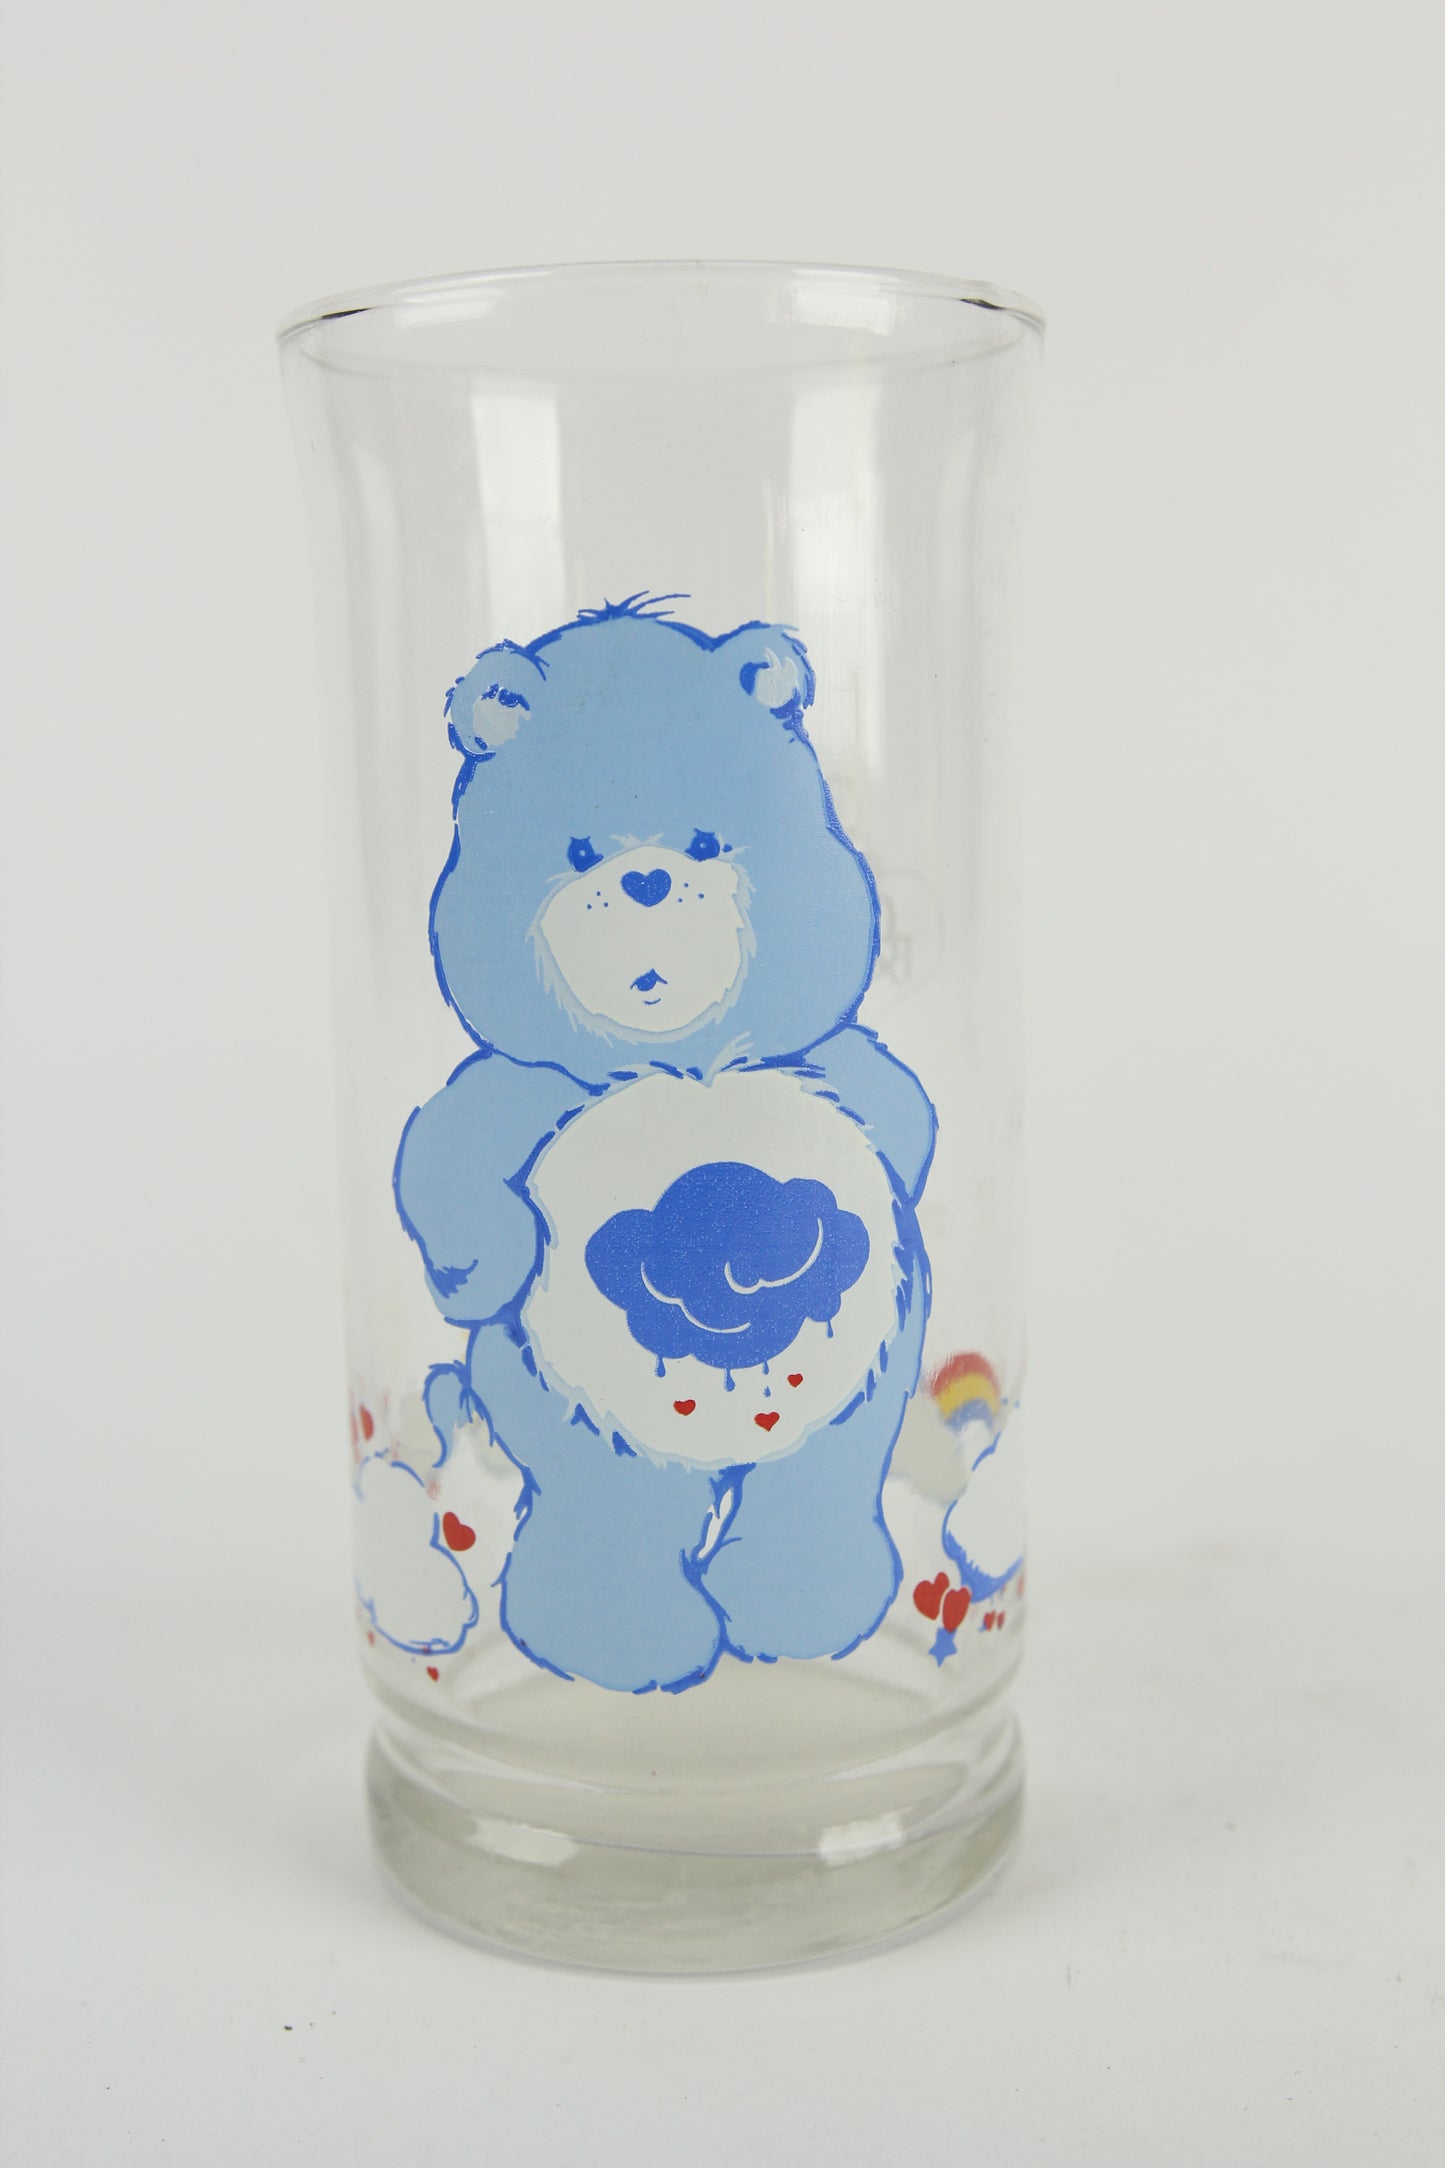 Limited Edition Care Bears Pizza Hut Collector's Series Glass Cups, Set of 4, 1983